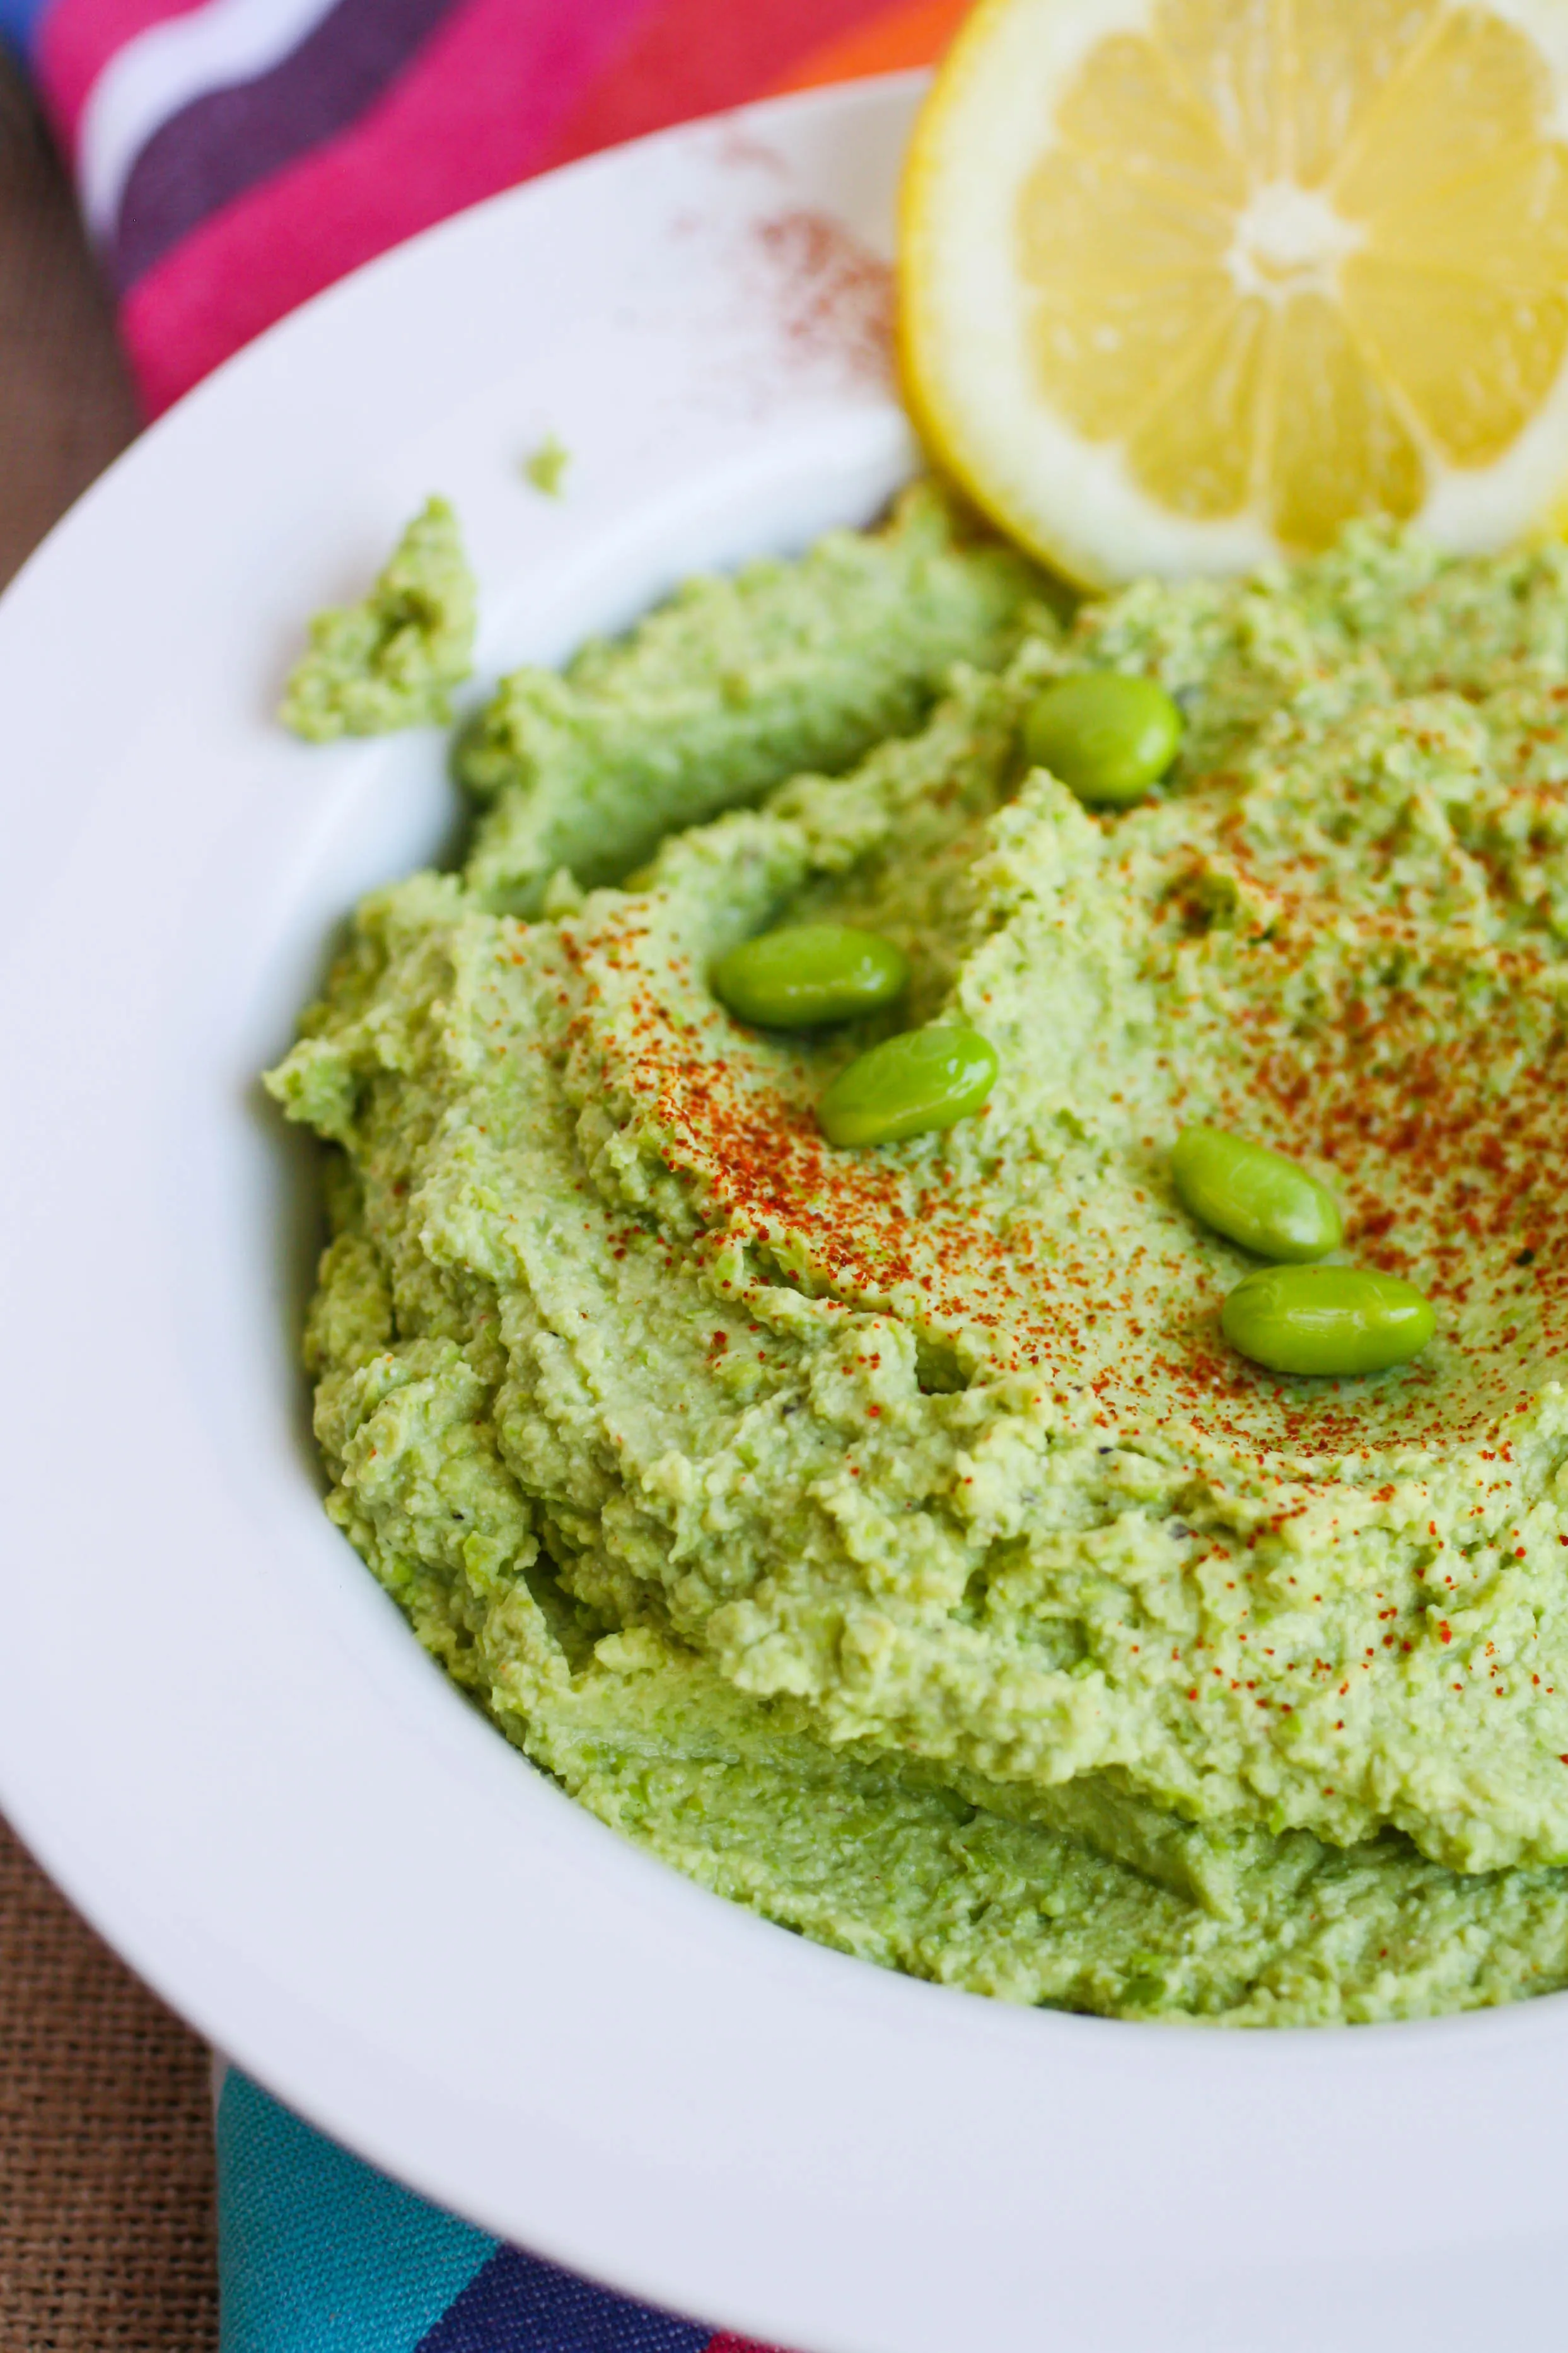 Easy Edamame-Pea Dip is a great party dip! I love it as part of a light meal that's perfect for the summer!